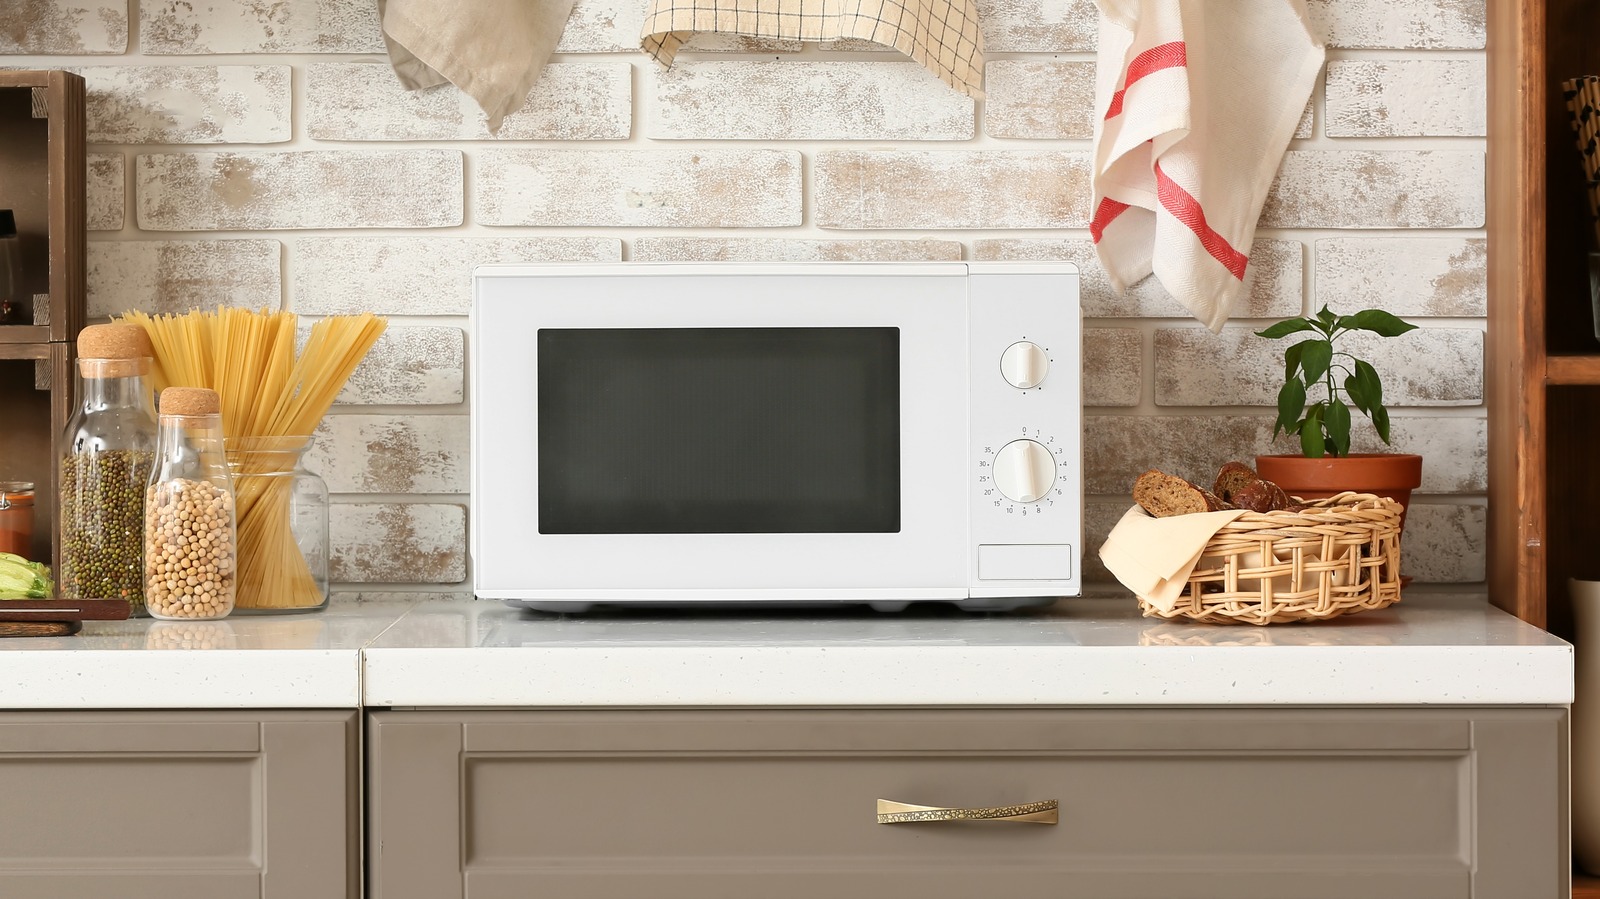 Major Microwave Brands Ranked Worst To Best